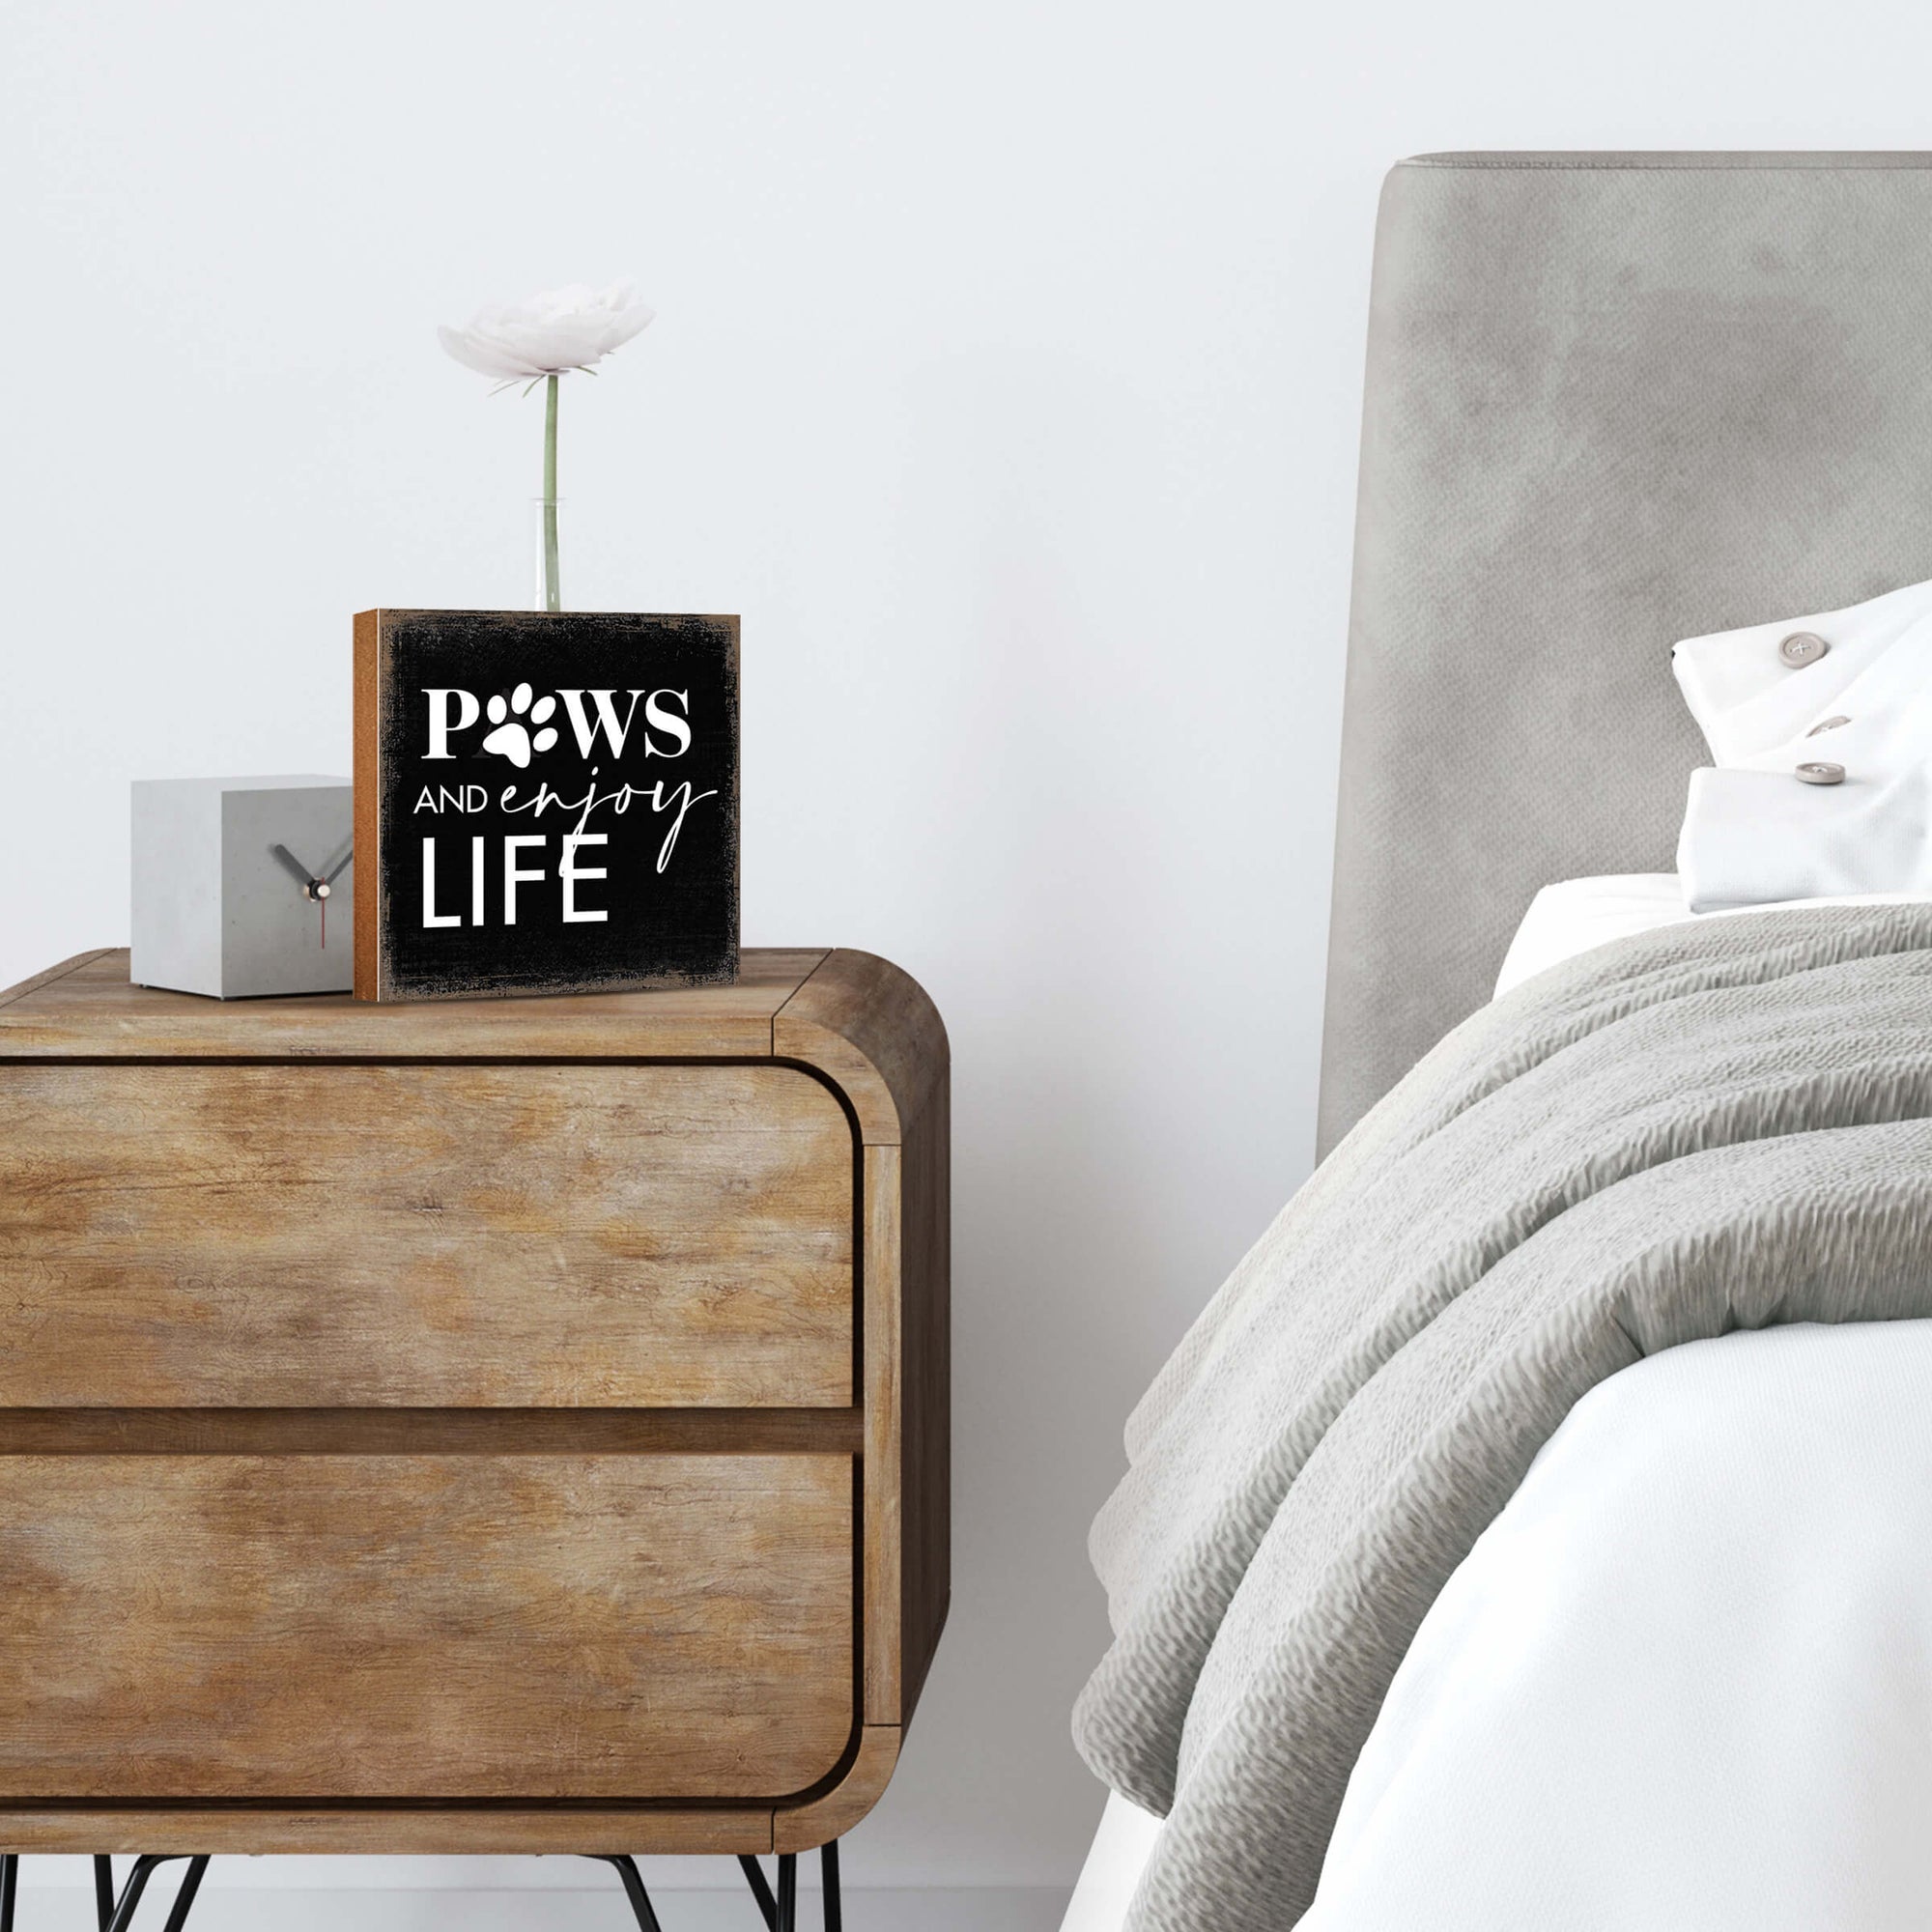 Wooden Shelf Decor and Tabletop Signs with Pet Verses - Paws and Enjoy